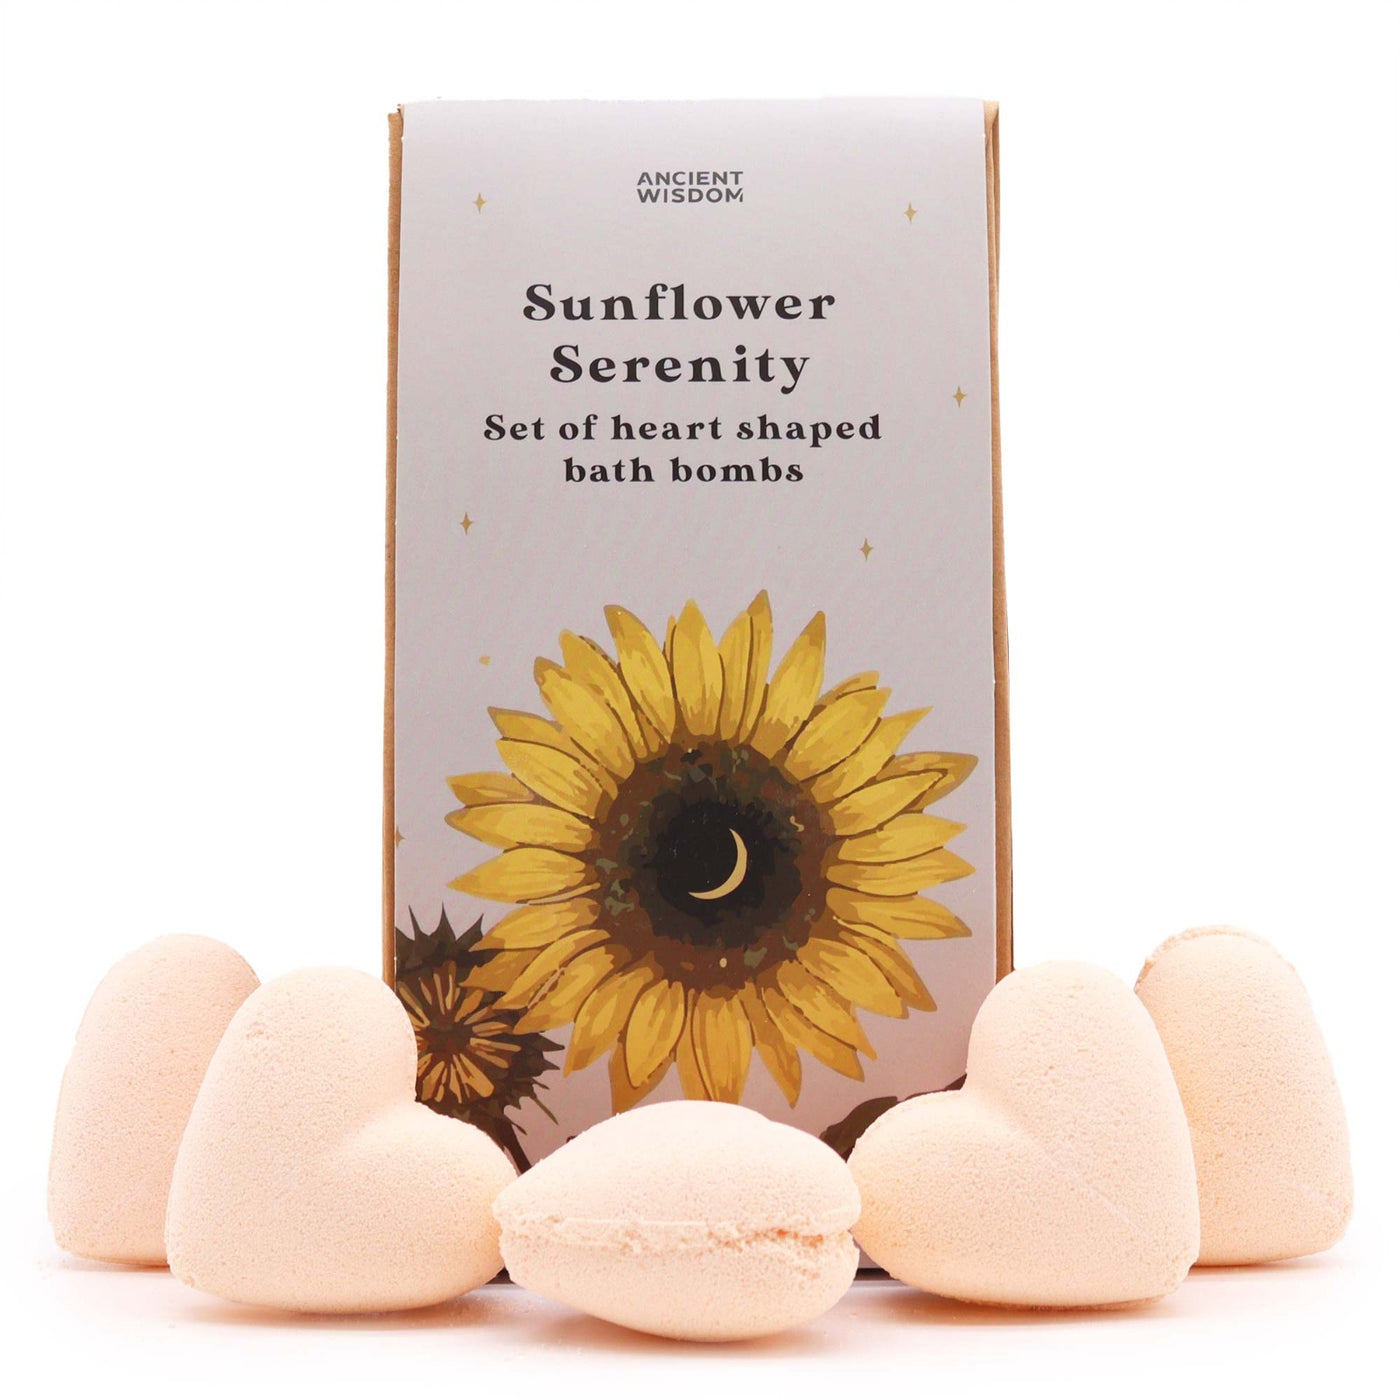 Sunflower Serenity Heart Bath Bomb Gift Set, Passion Fruit Scent, Valentine, Mother's Day Gift. 